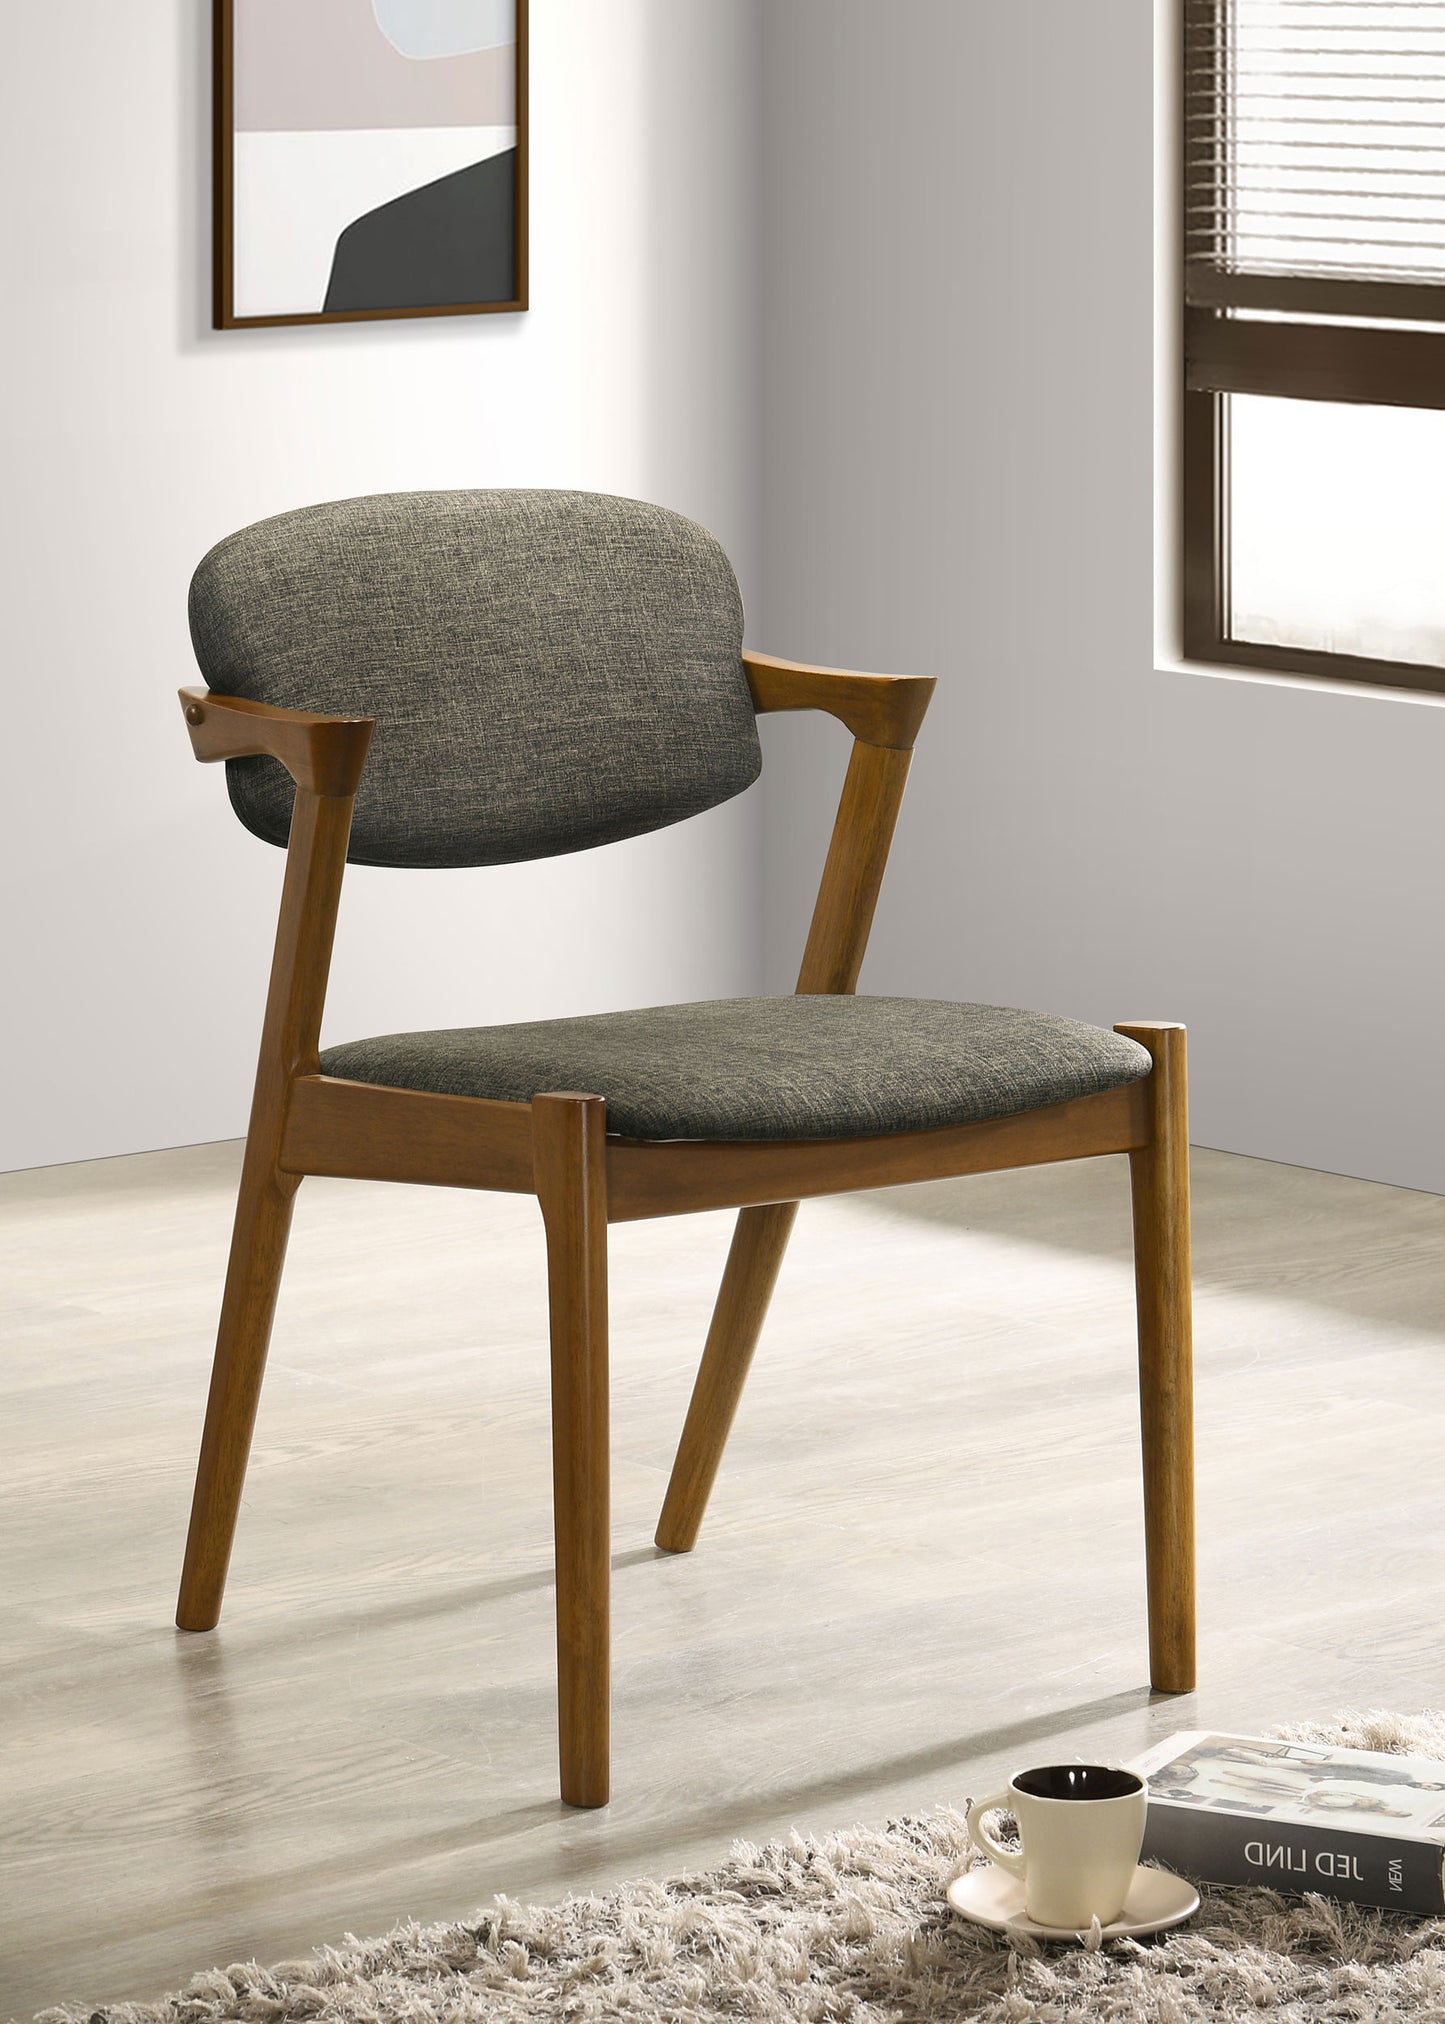 Malone Dining Side Chairs Brown and Dark Walnut (Set of 2)